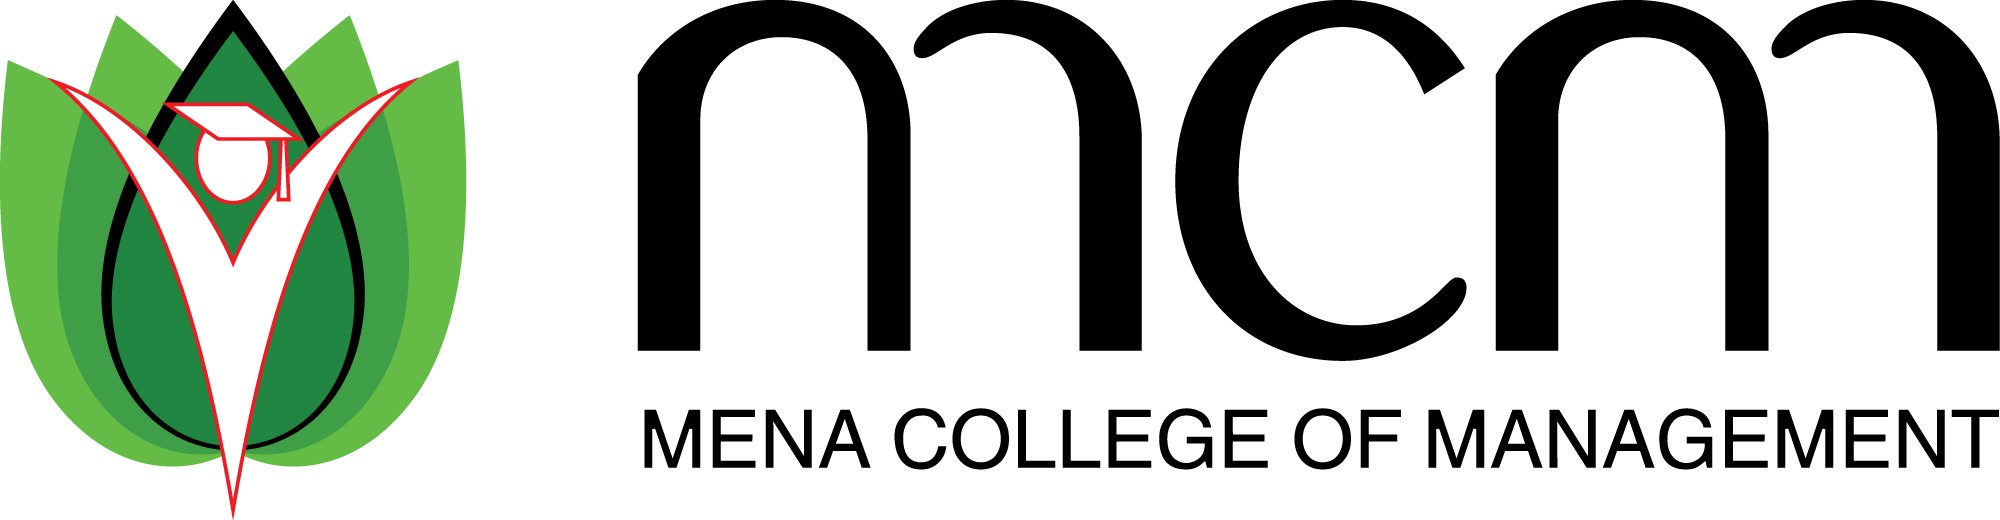 MENA College of Management - Company employment profile | Laimoon.com